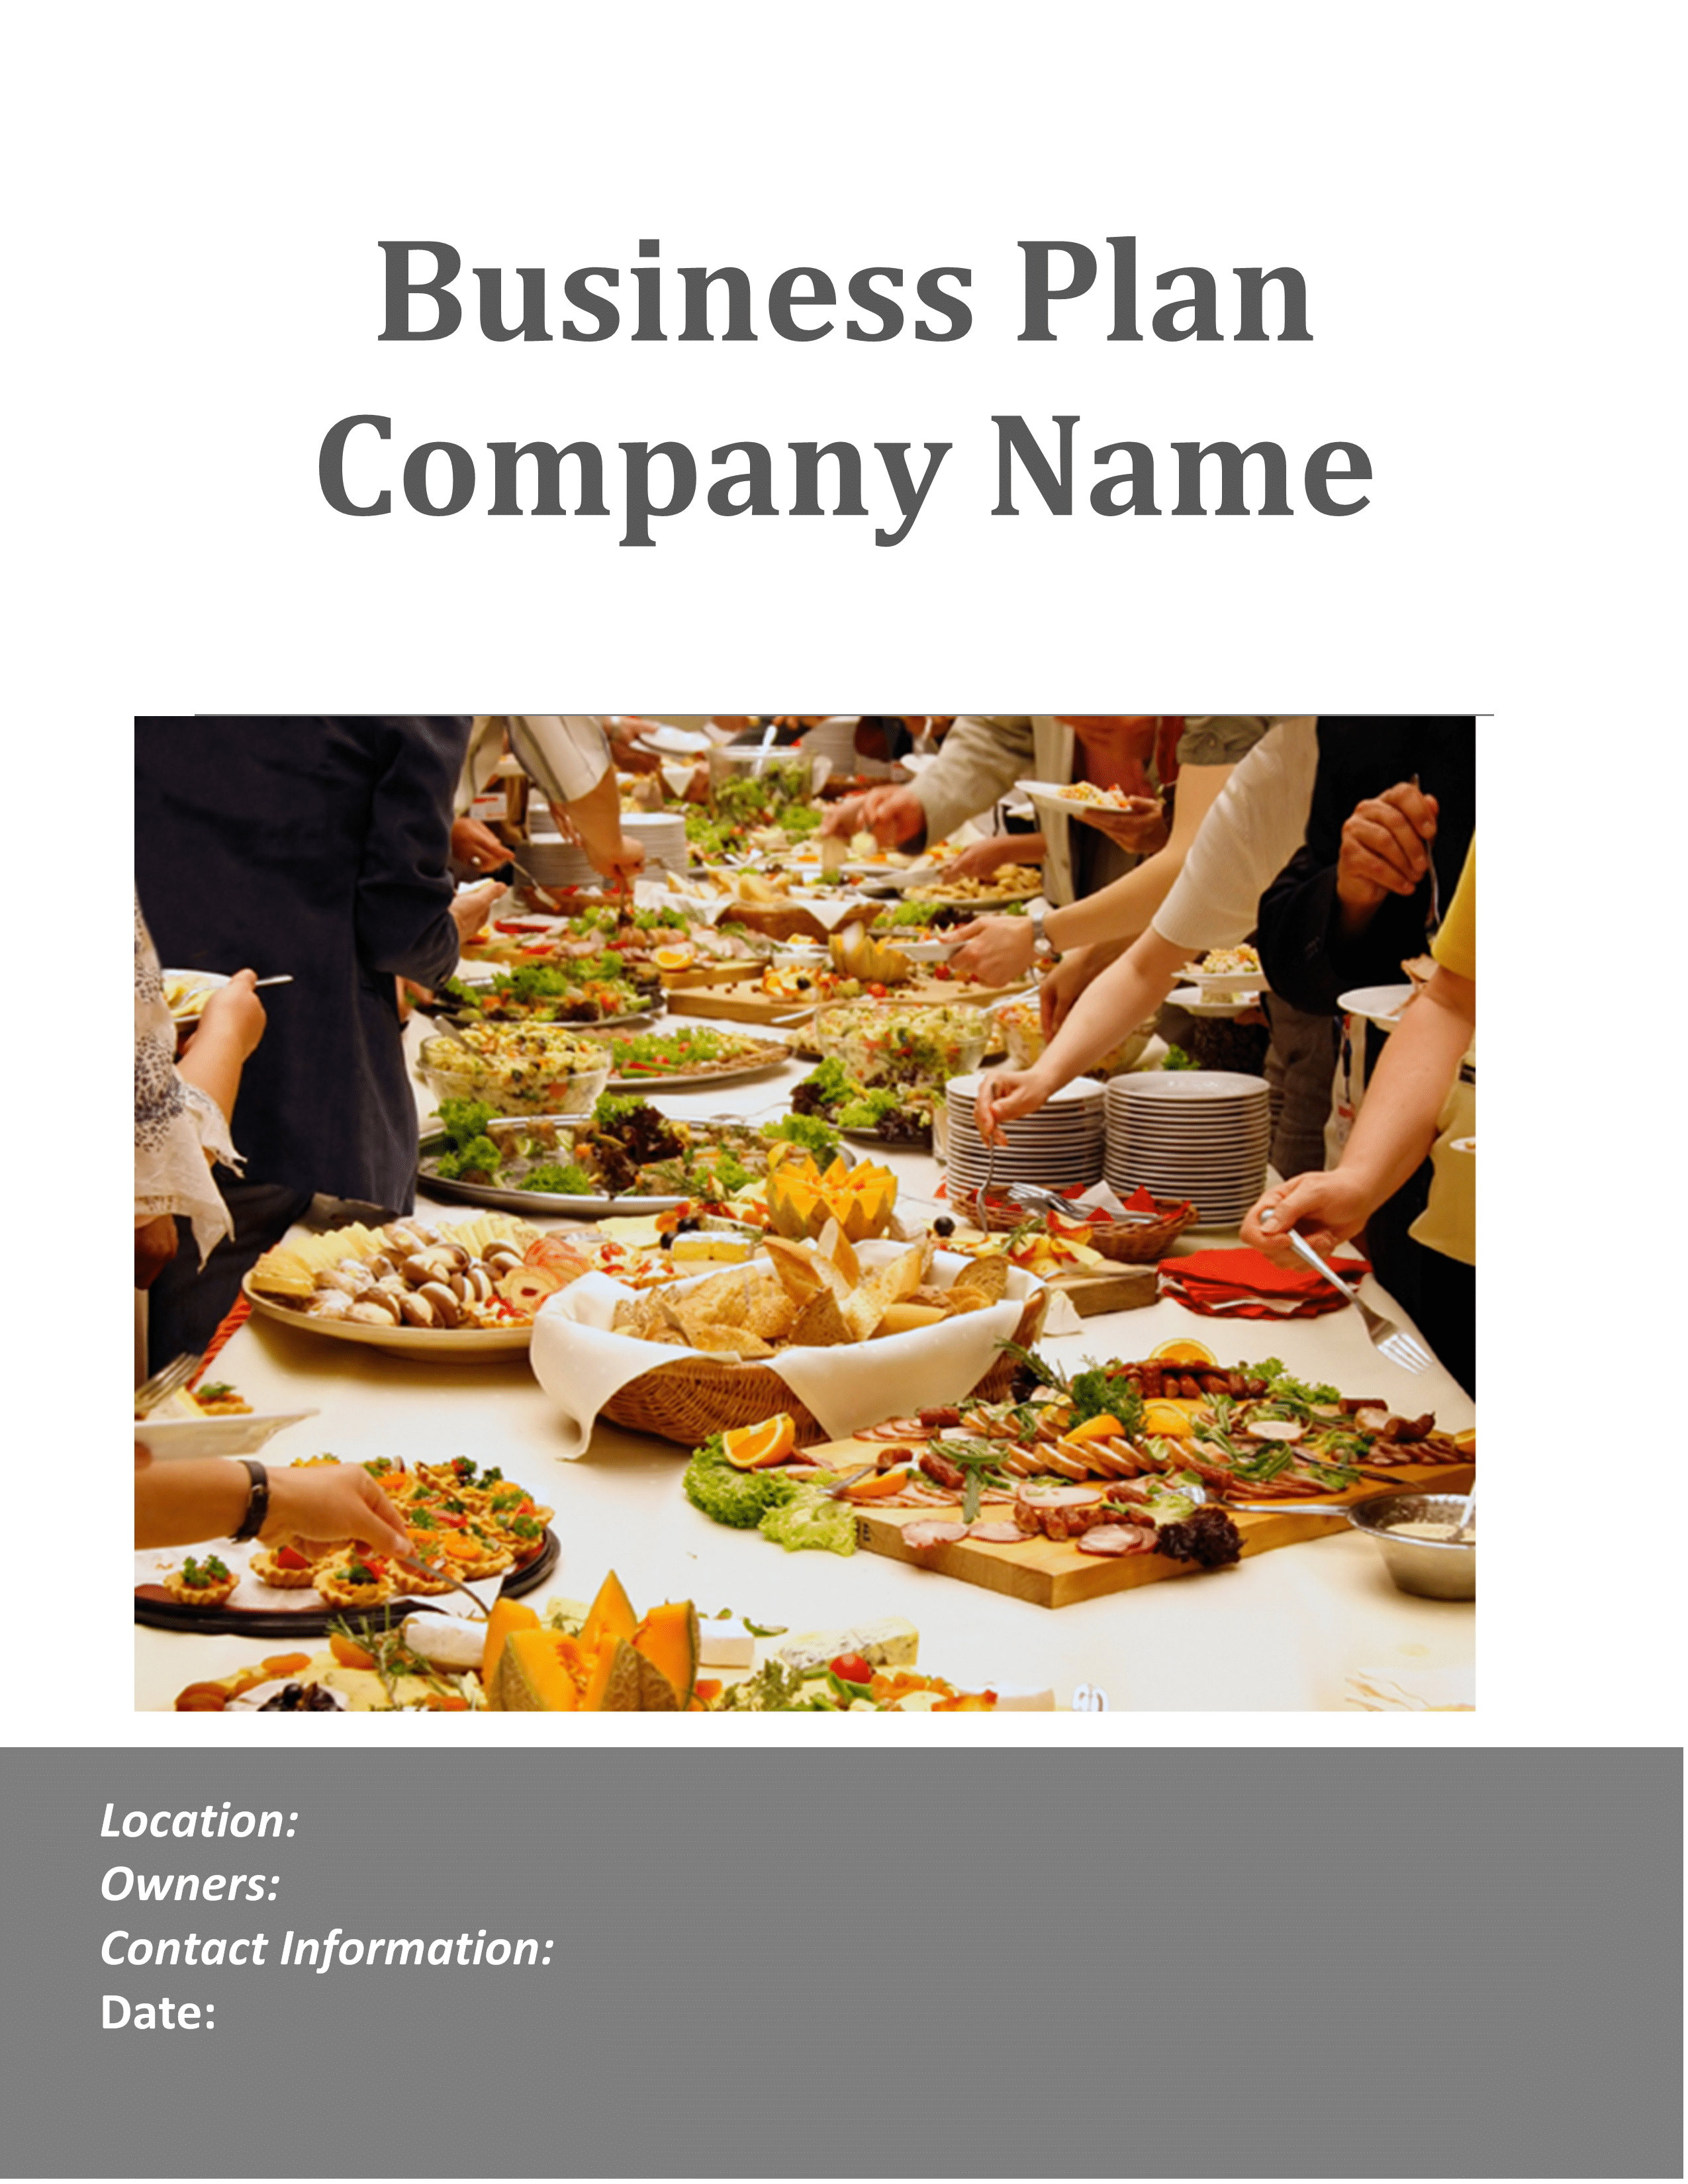 Catering Business Plan Template Sample Pages Black Box Business Plans